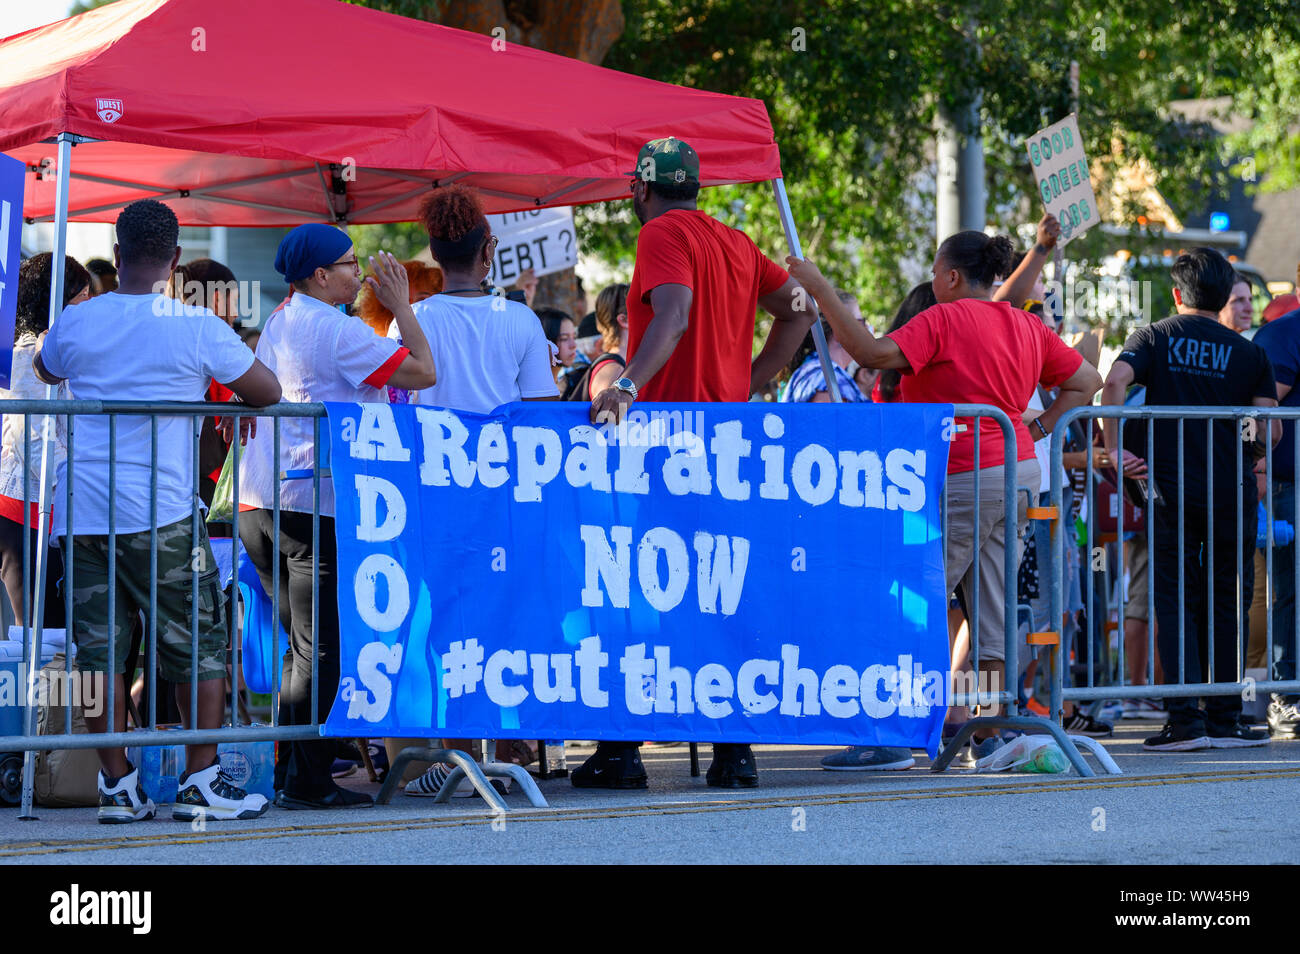 Houston, Texas - September 12, 2019: Small, vocal group of ADOS activists demand reparations for slavery outside Democratic primary debate venue near Stock Photo